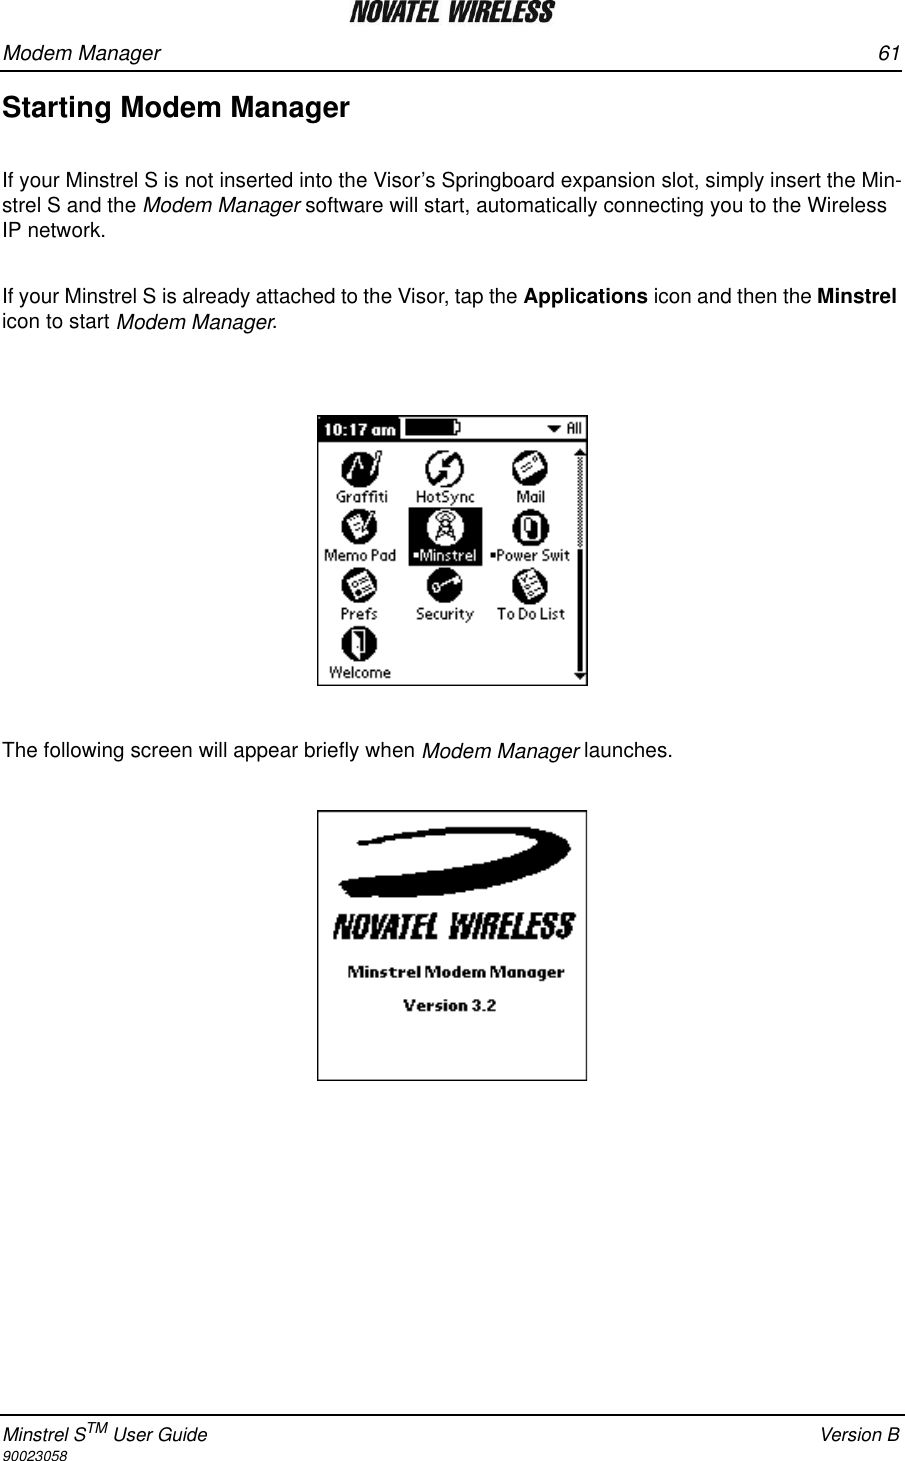 Modem Manager 61Minstrel STM User Guide Version B90023058Starting Modem ManagerIf your Minstrel S is not inserted into the Visor’s Springboard expansion slot, simply insert the Min-strel S and the Modem Manager software will start, automatically connecting you to the Wireless IP network.If your Minstrel S is already attached to the Visor, tap the Applications icon and then the Minstrel icon to start Modem Manager.The following screen will appear briefly when Modem Manager launches.